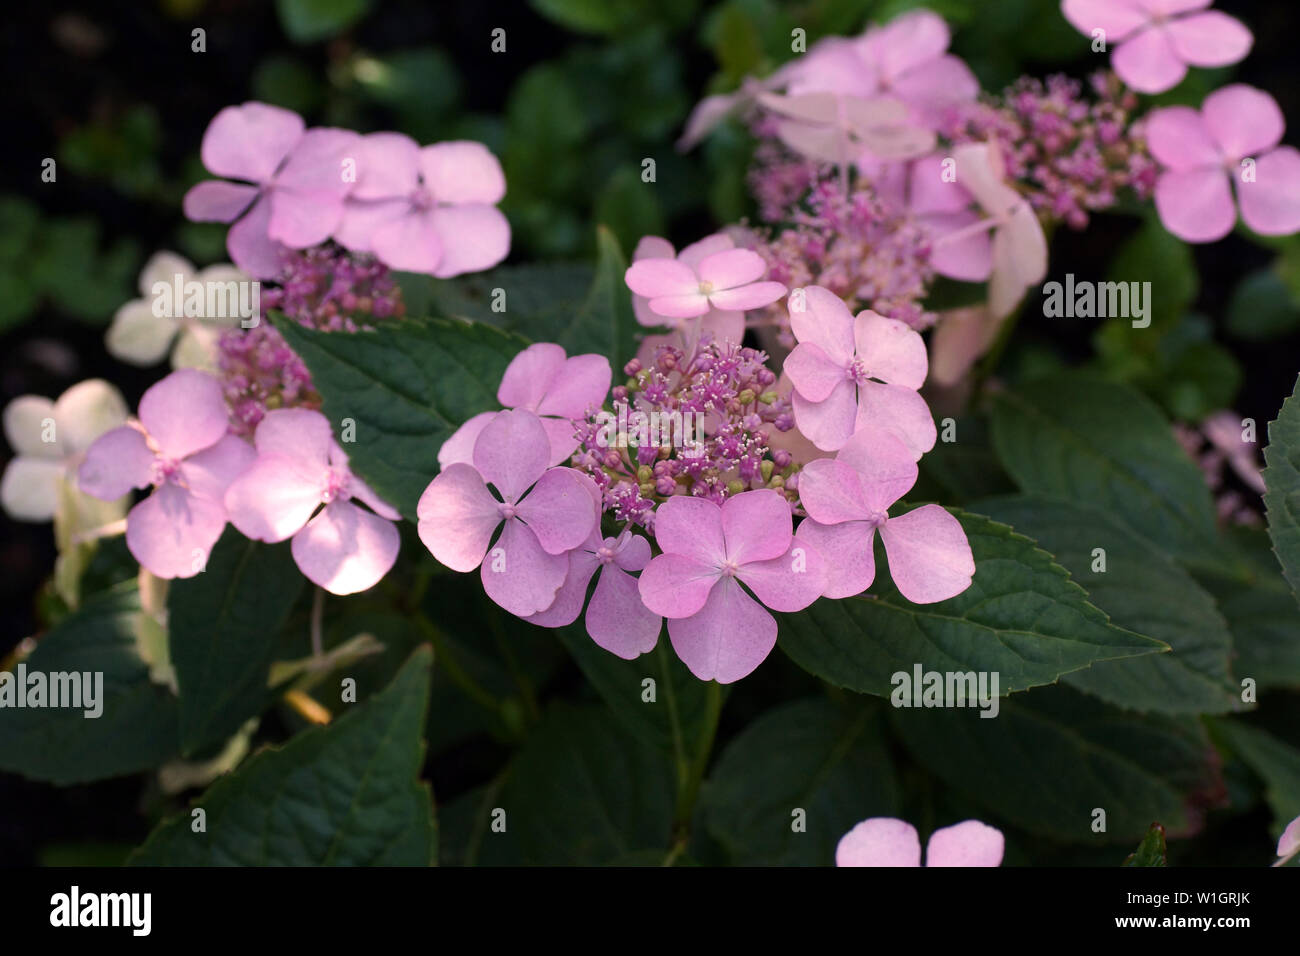 Hydrangea serrata Intermedia pink a corymb. А species of flowering plant in the family Hydrangeaceae, native to of Korea and Japan. Stock Photo